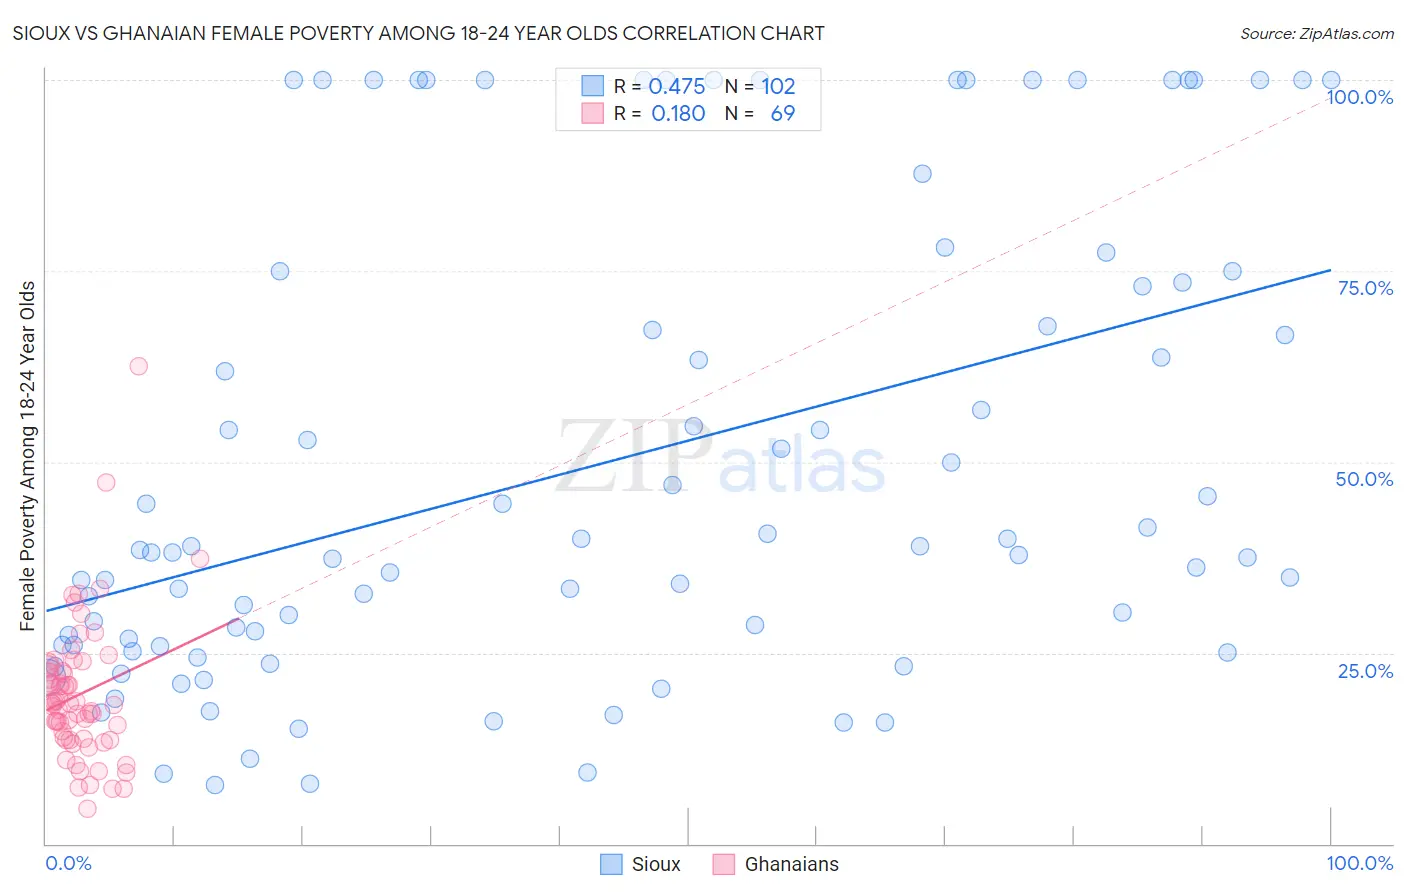 Sioux vs Ghanaian Female Poverty Among 18-24 Year Olds